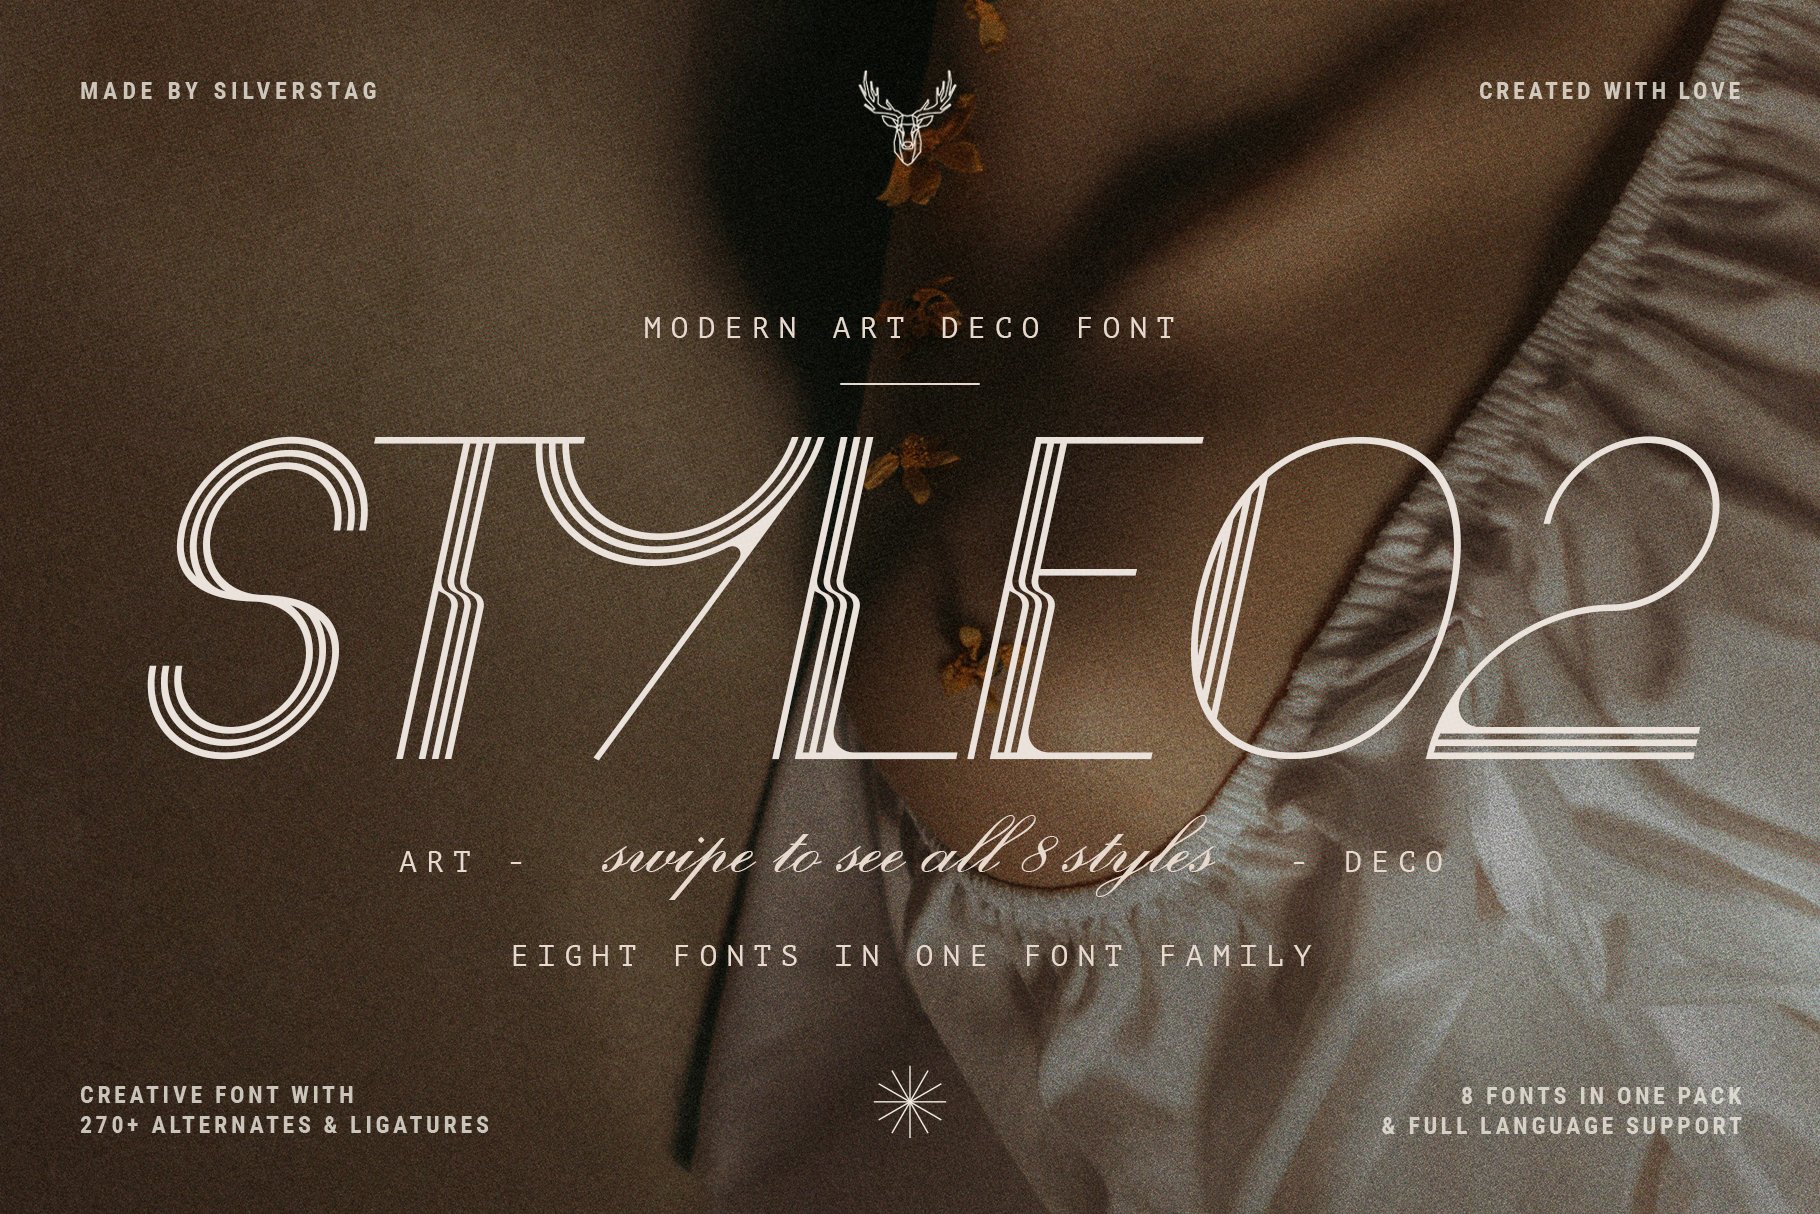 24 bogart deco a ligature rich font family by silver stag 993